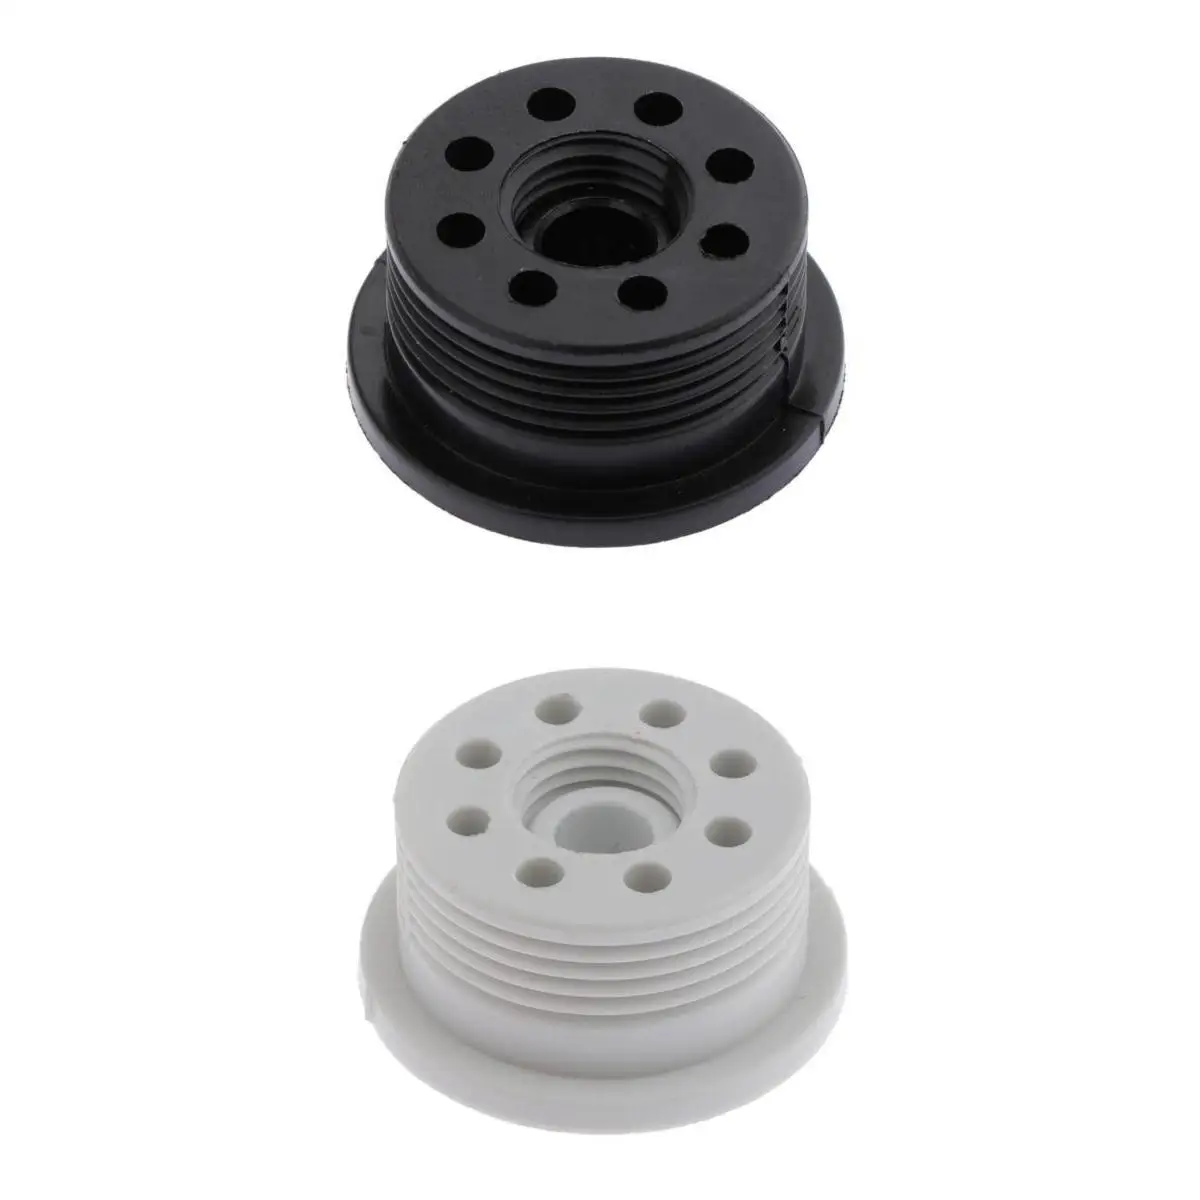 2pcs  Board Surfboard Auto Air Vent Screw-in Exhaust Valve Plug Stopper